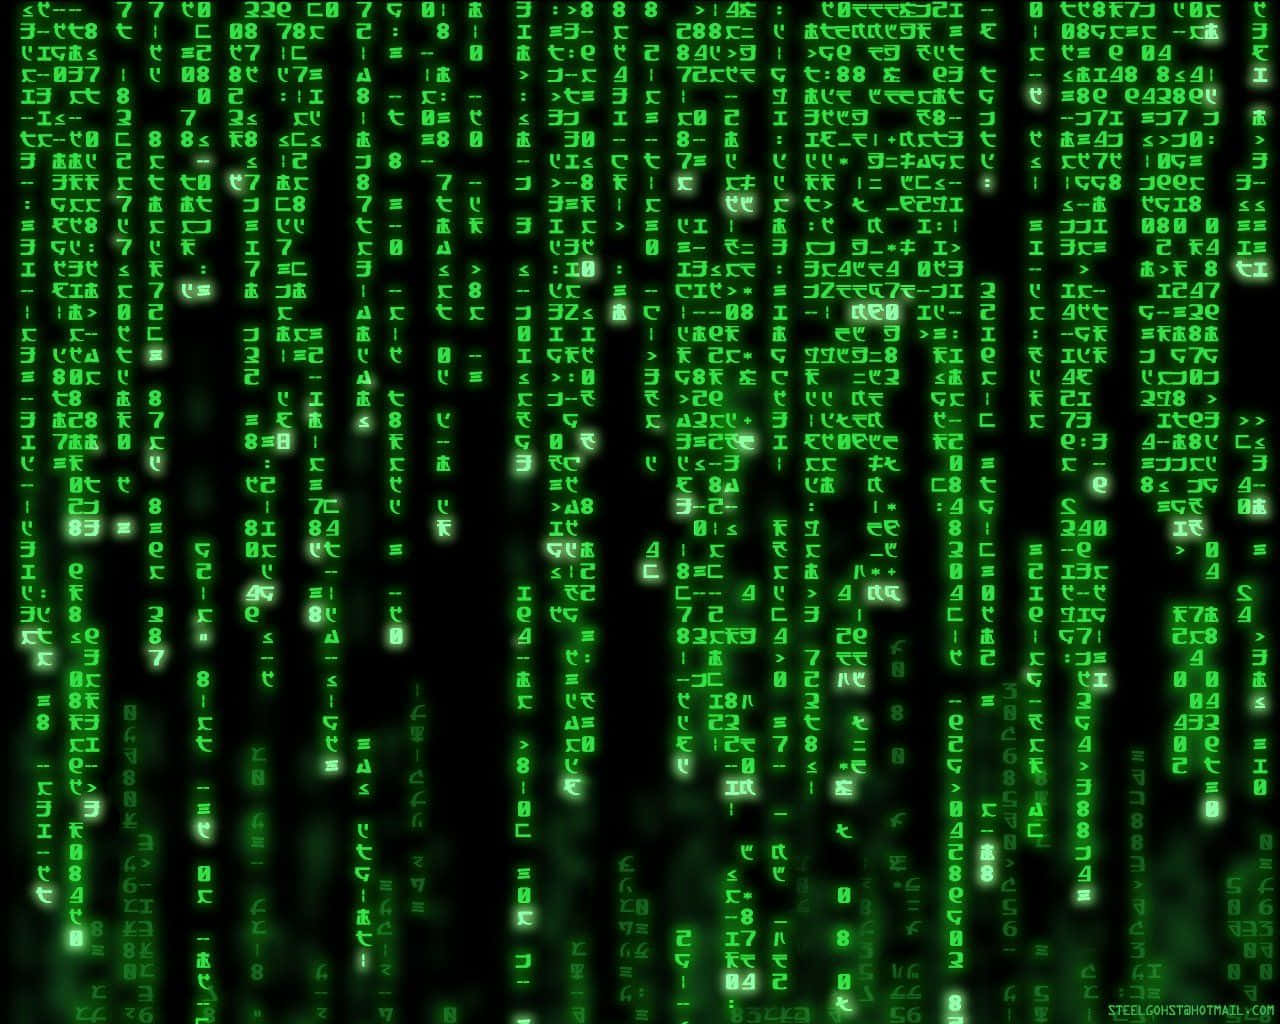 Level up your device with the Matrix Iphone Wallpaper